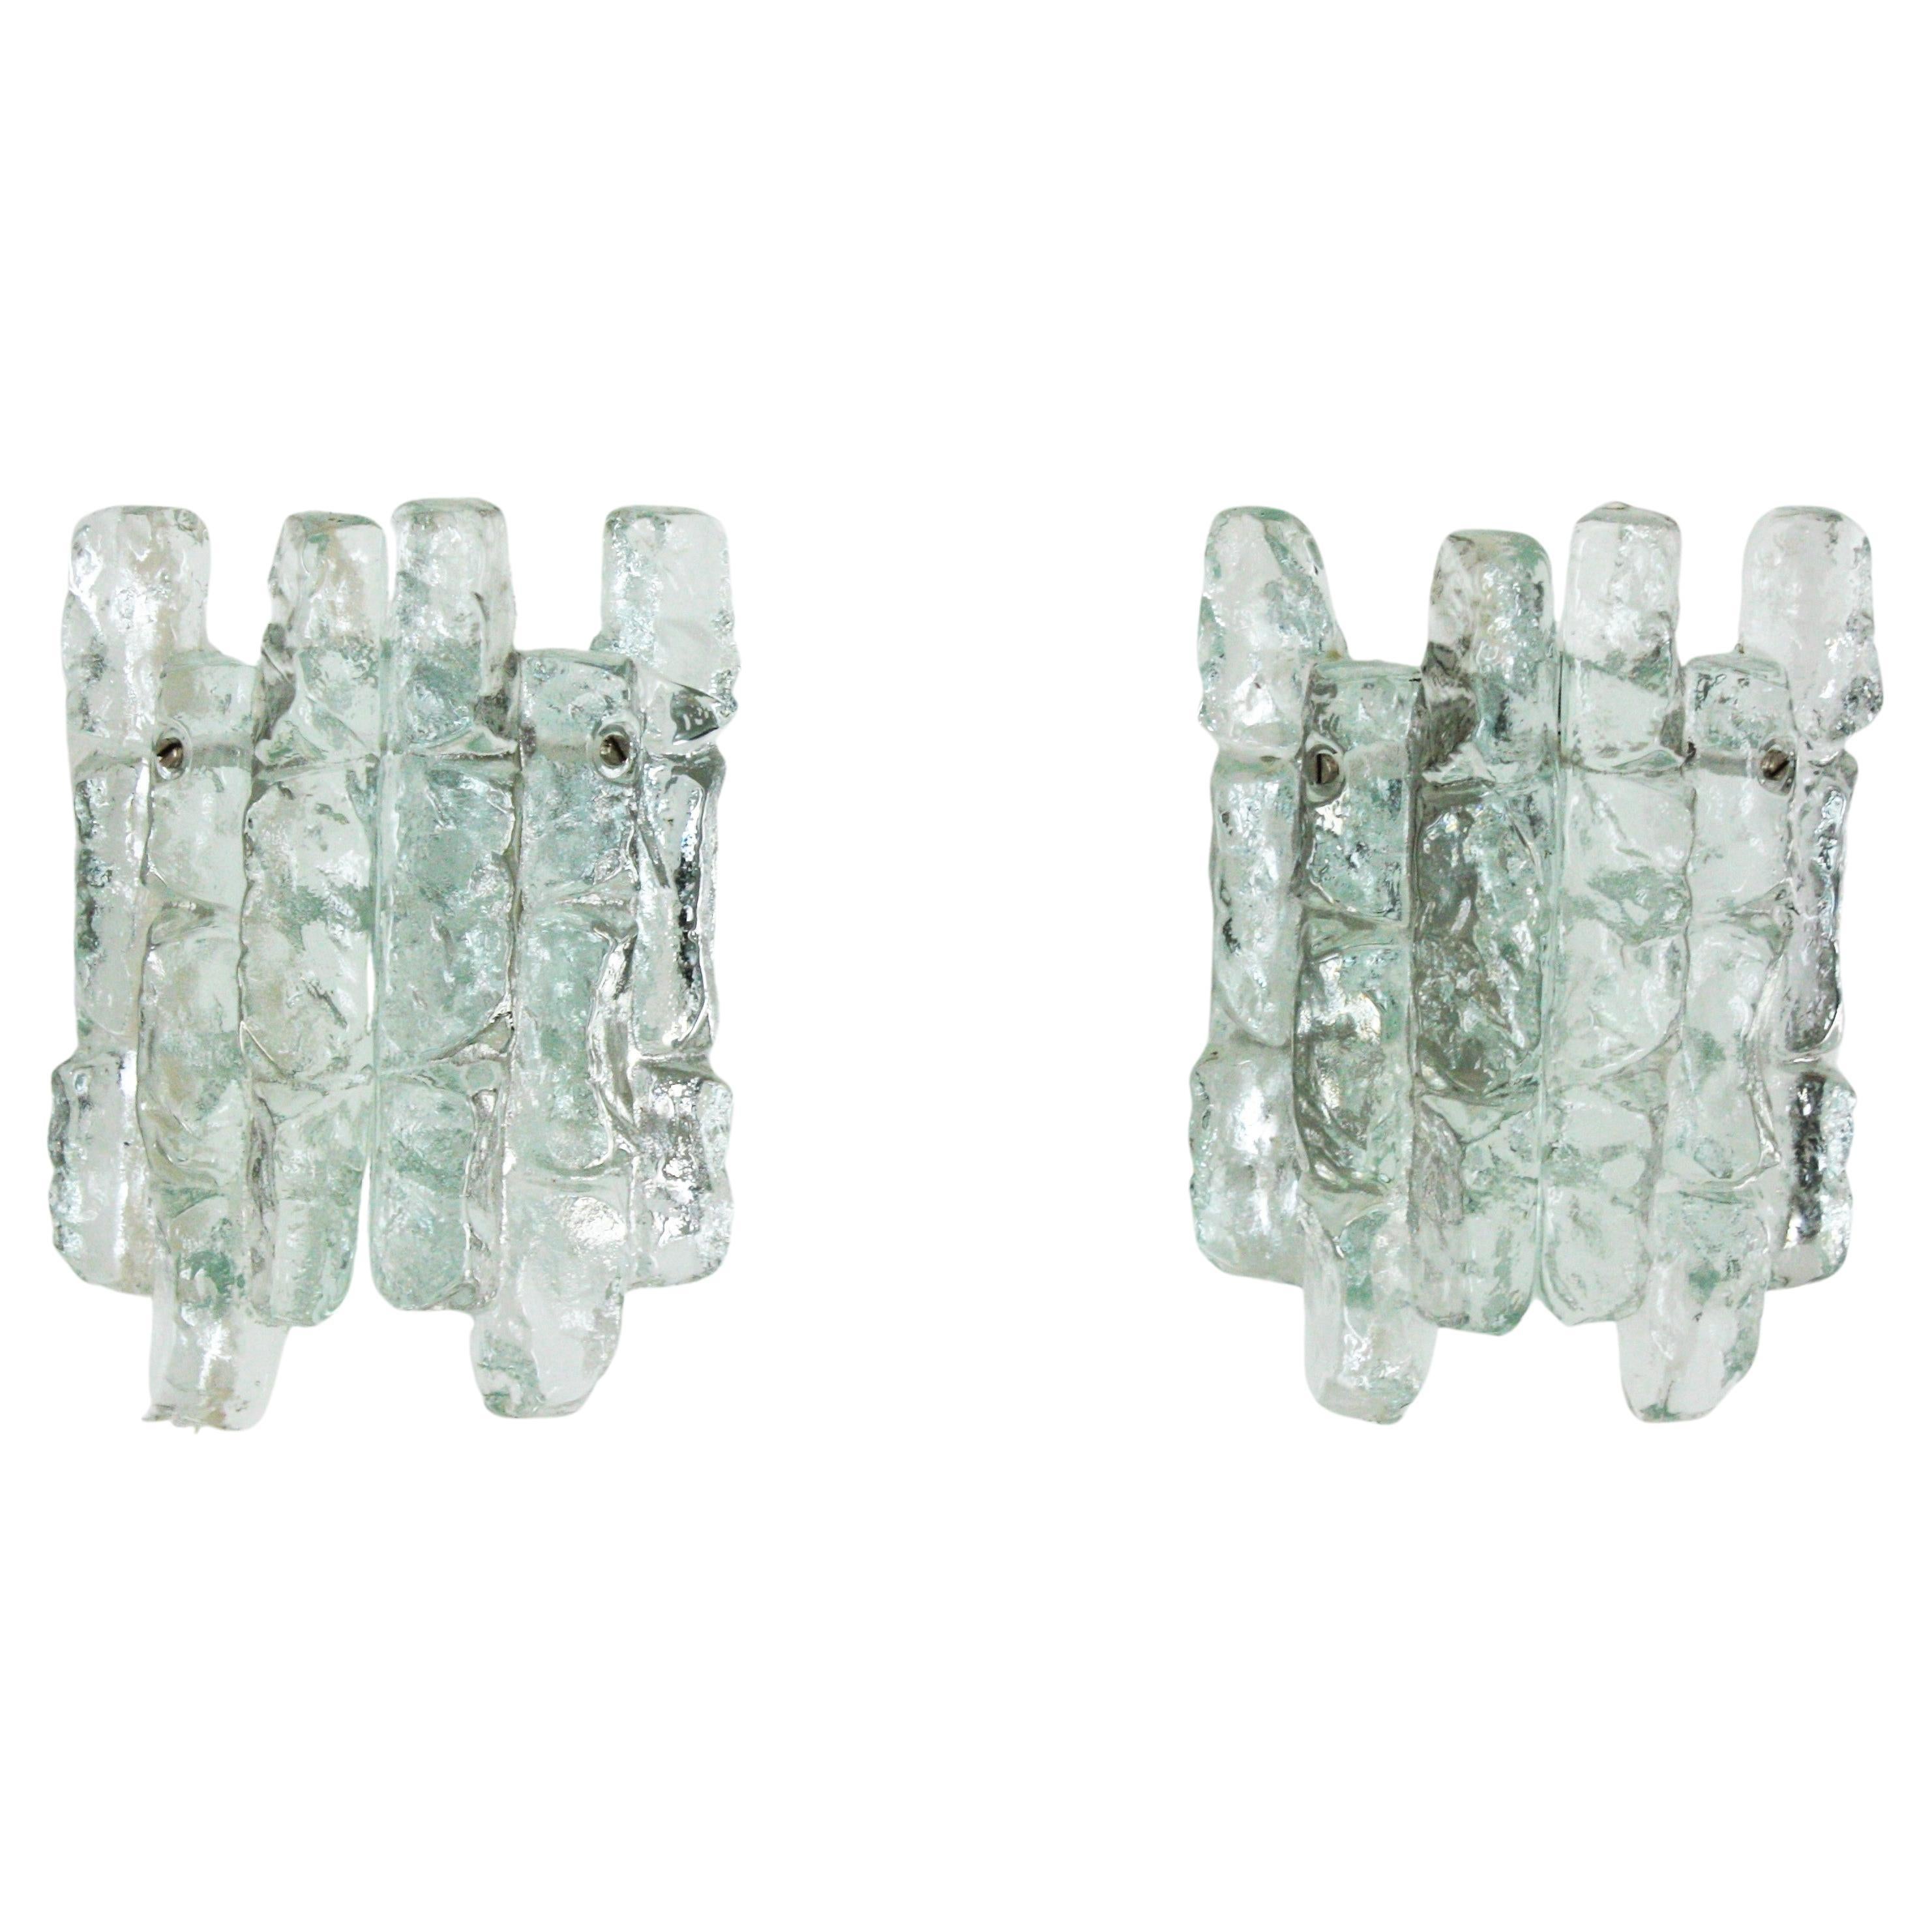 Pair of Kalmar Ice Glass Wall Sconces, 1960s For Sale